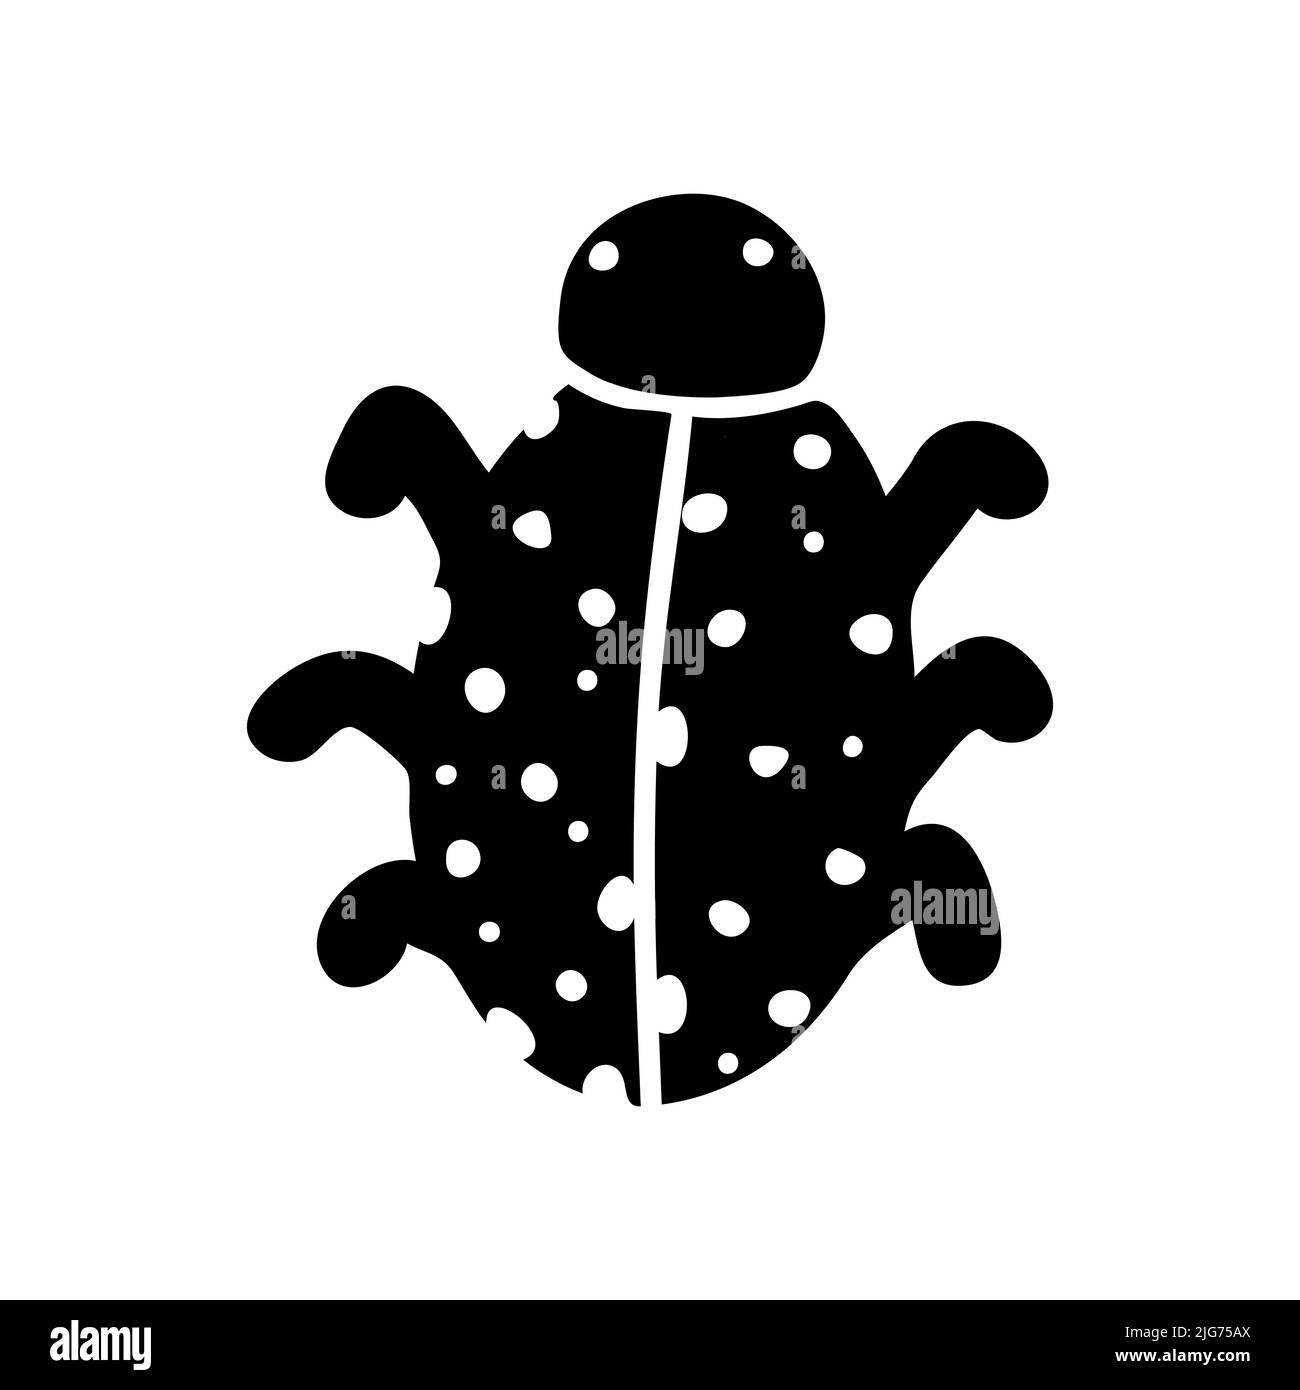 Beetle, insect, ladybug flat line art illustration in doodle style. Cute ladybug. Insect icon Stock Vector